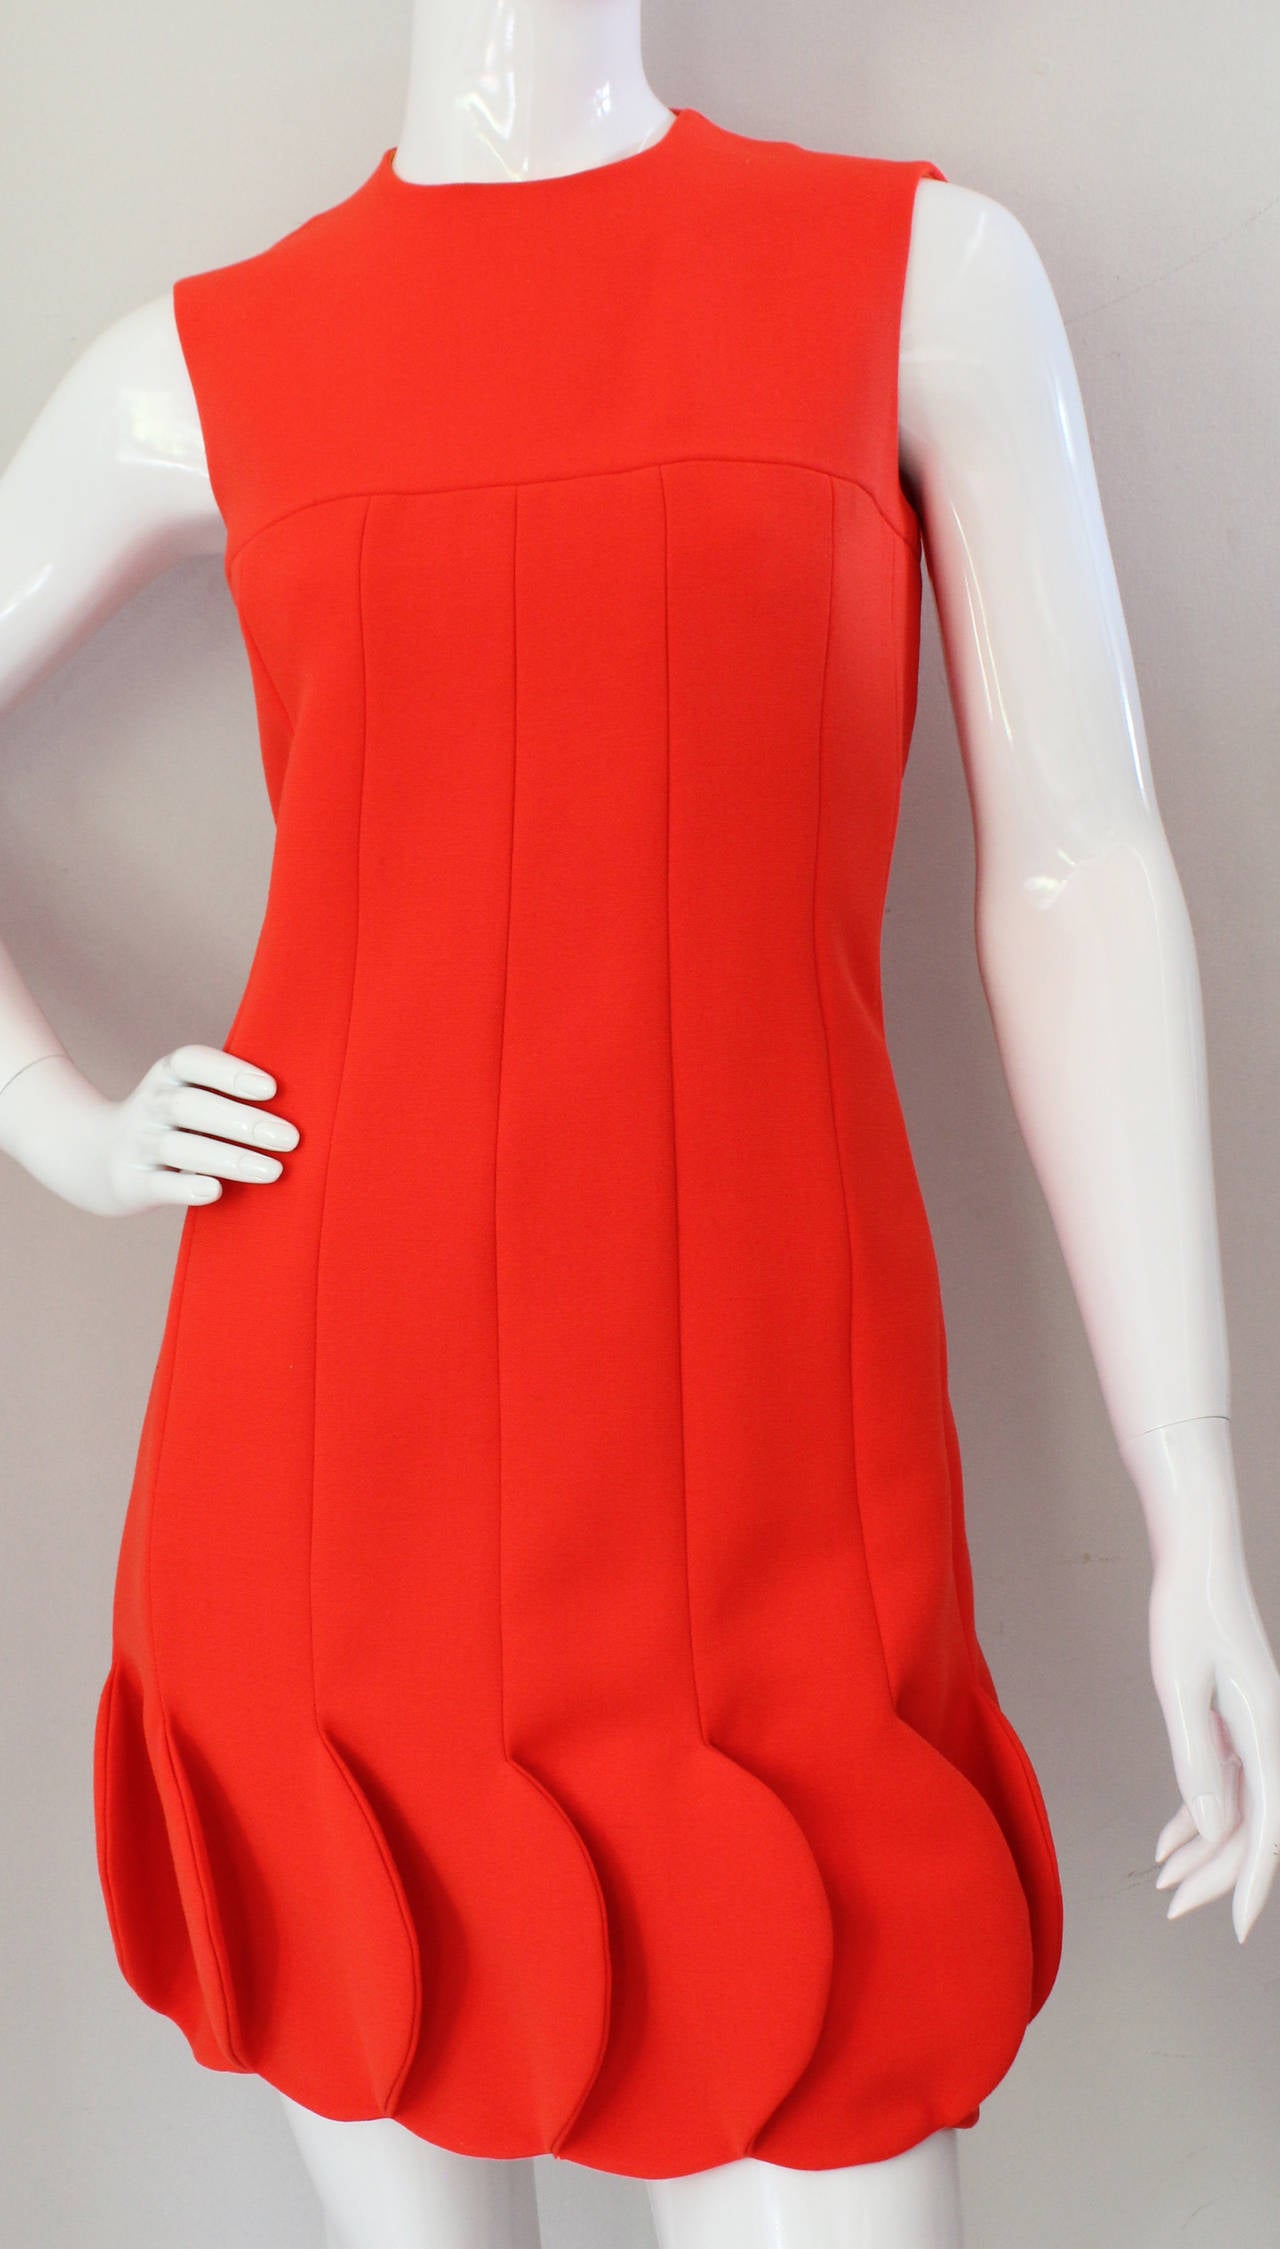 This circa 1968 Pierre Cardin bright orange wool sleeveless dress with petalled or 